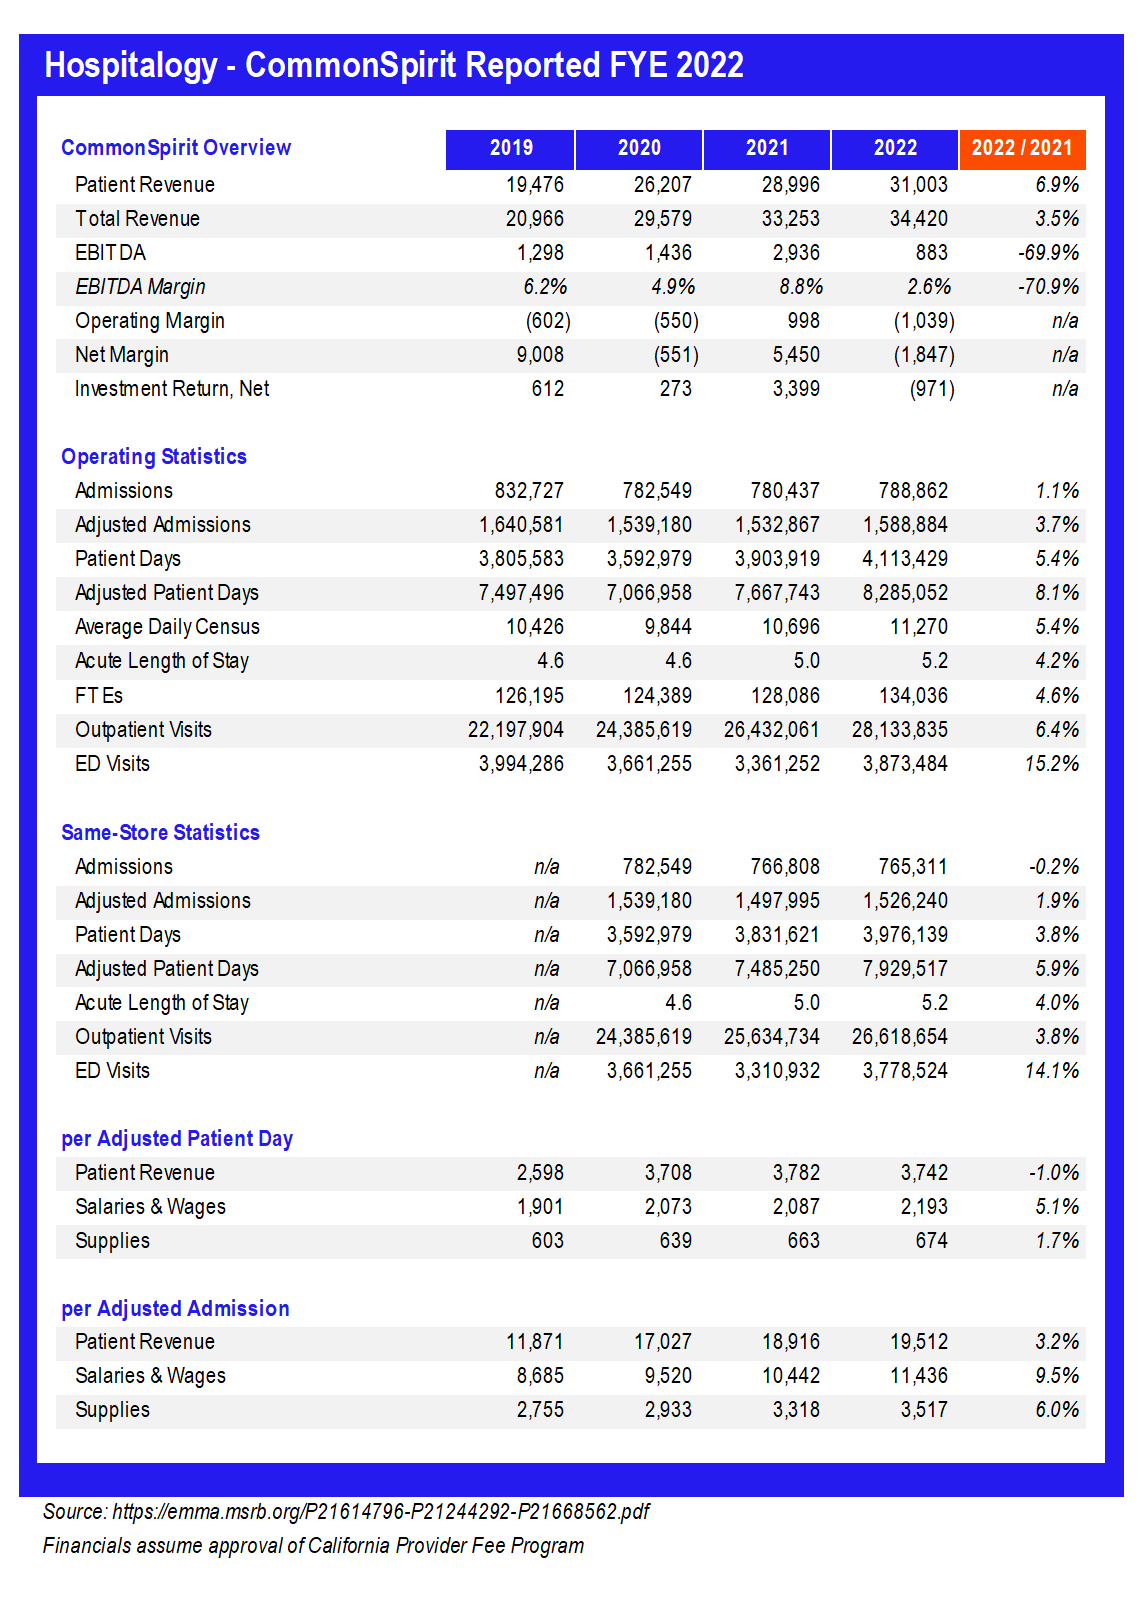 CommonSpirit Health 2022 financial and operating results - Hospitalogy